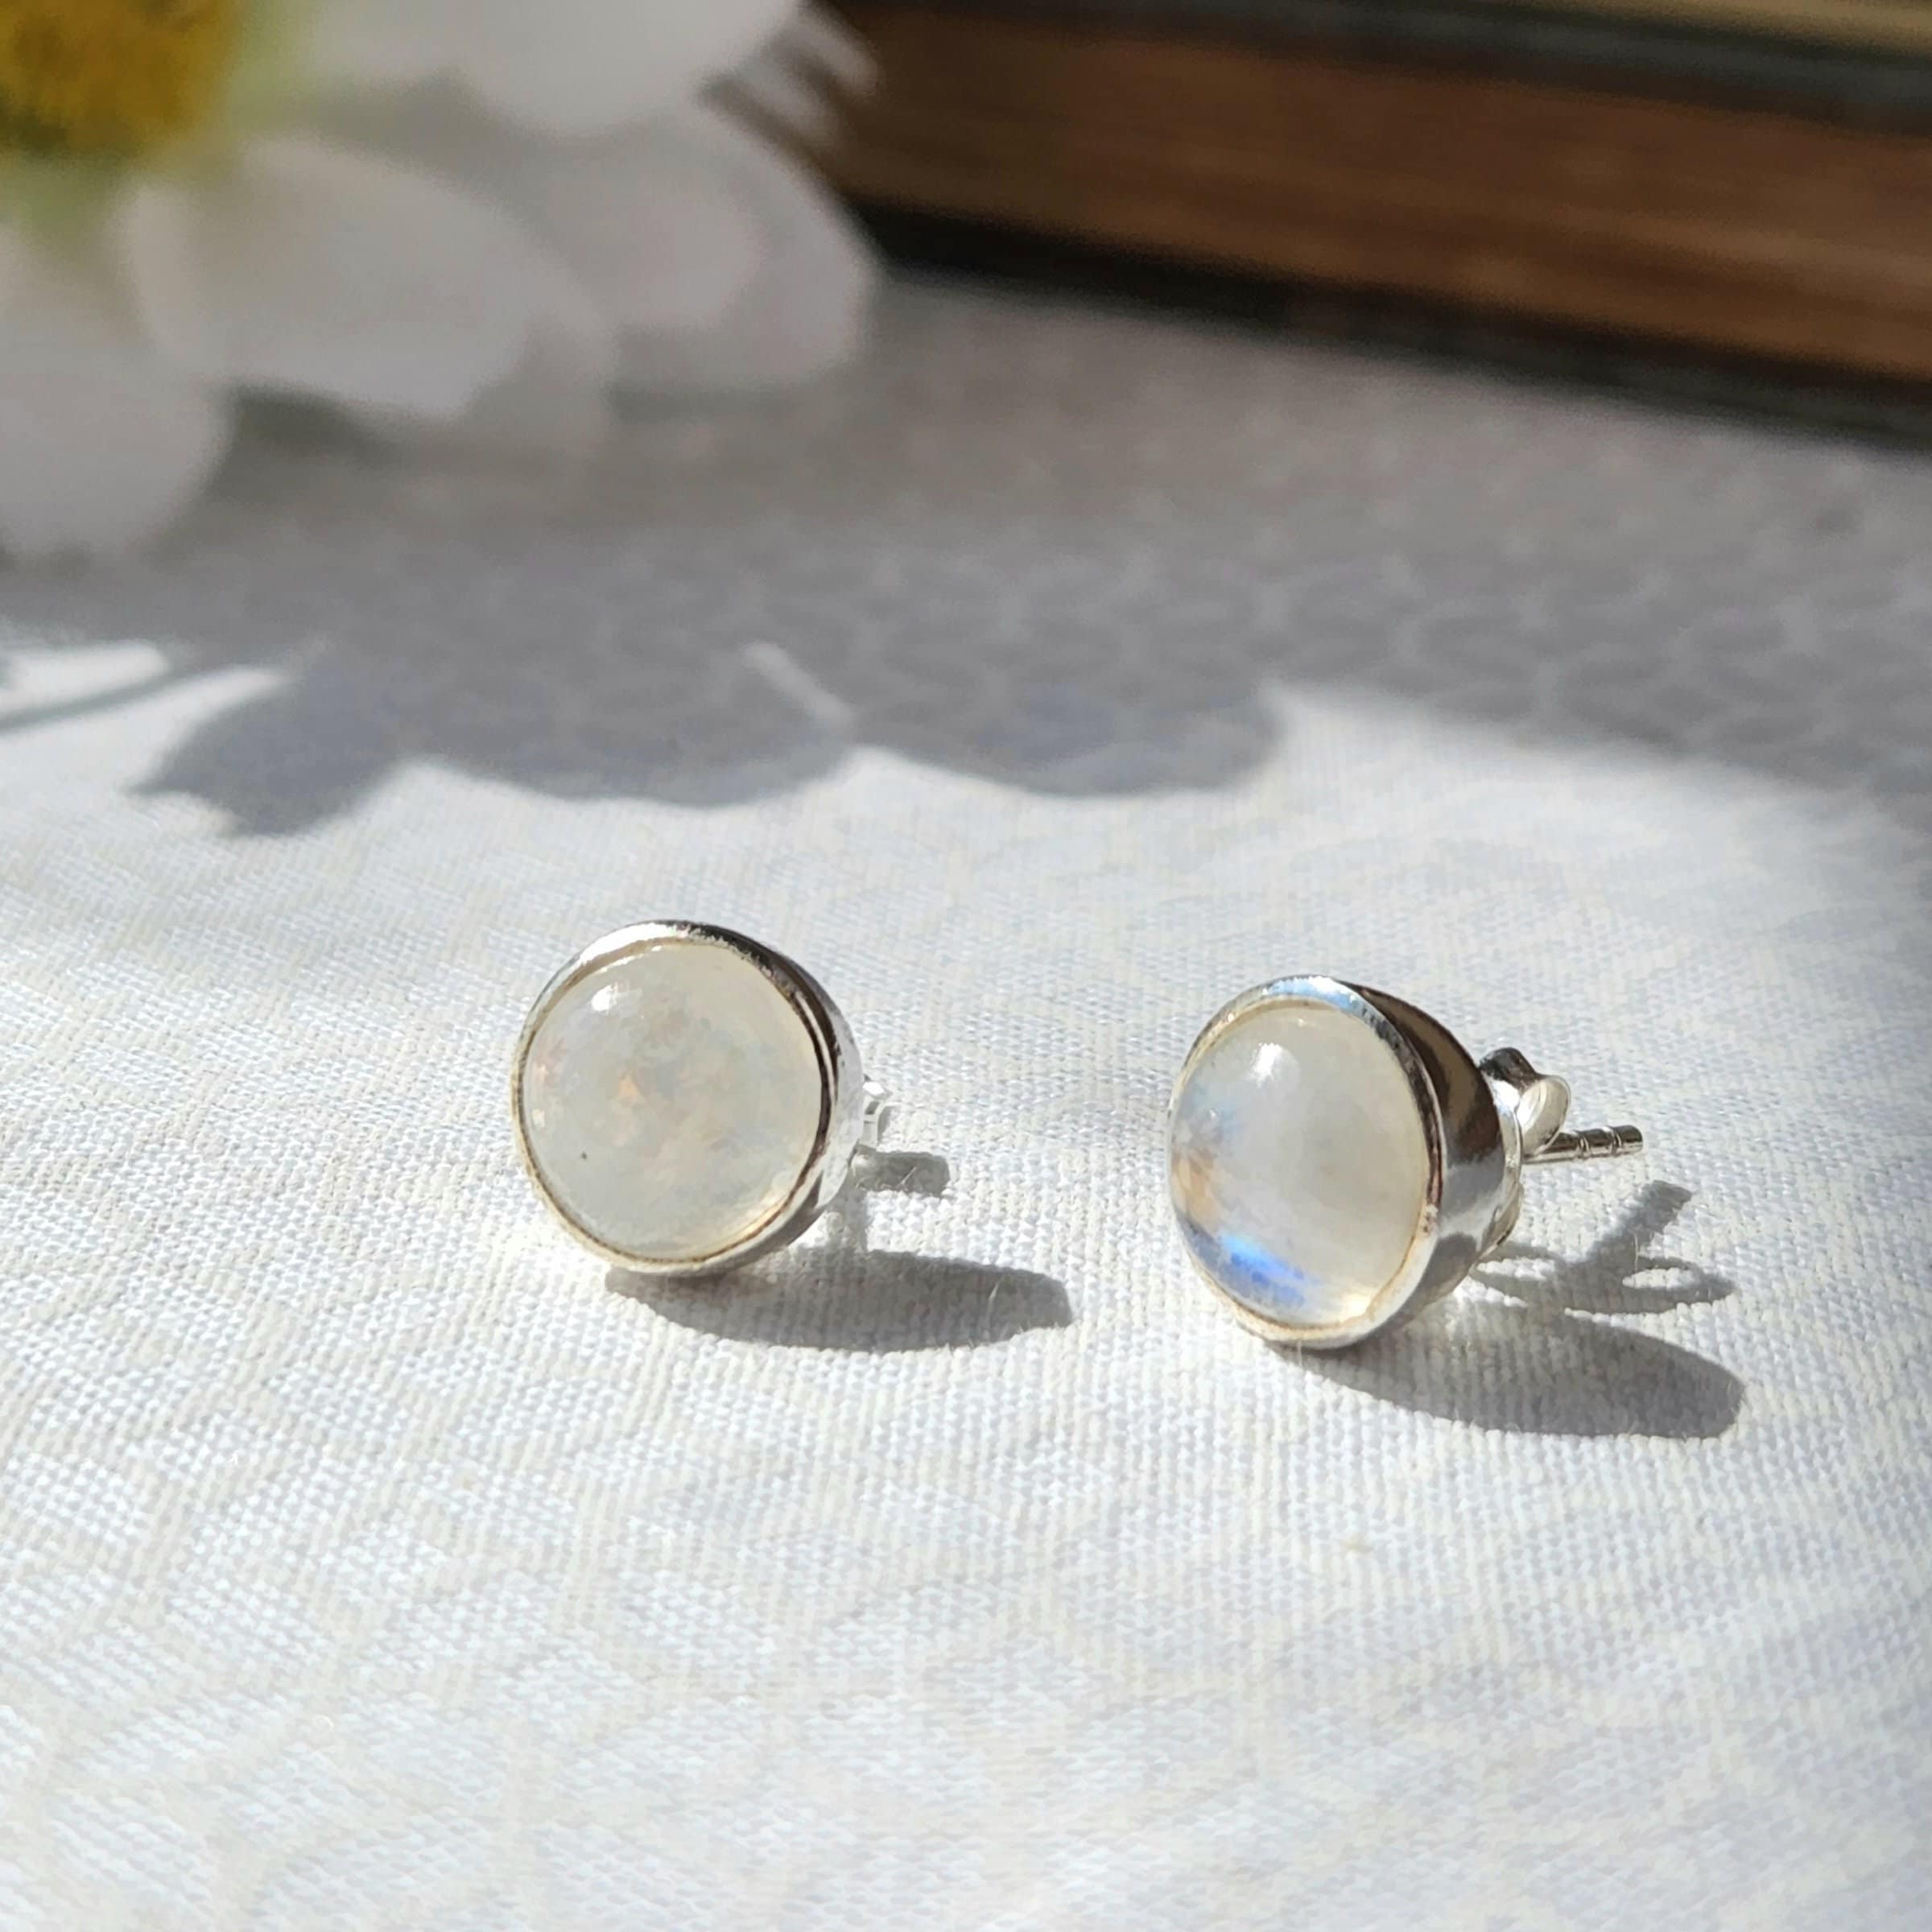 Buy Koral Jewelry Sterling Silver Moonstone Stud Earrings Online at Lowest  Price Ever in India | Check Reviews & Ratings - Shop The World